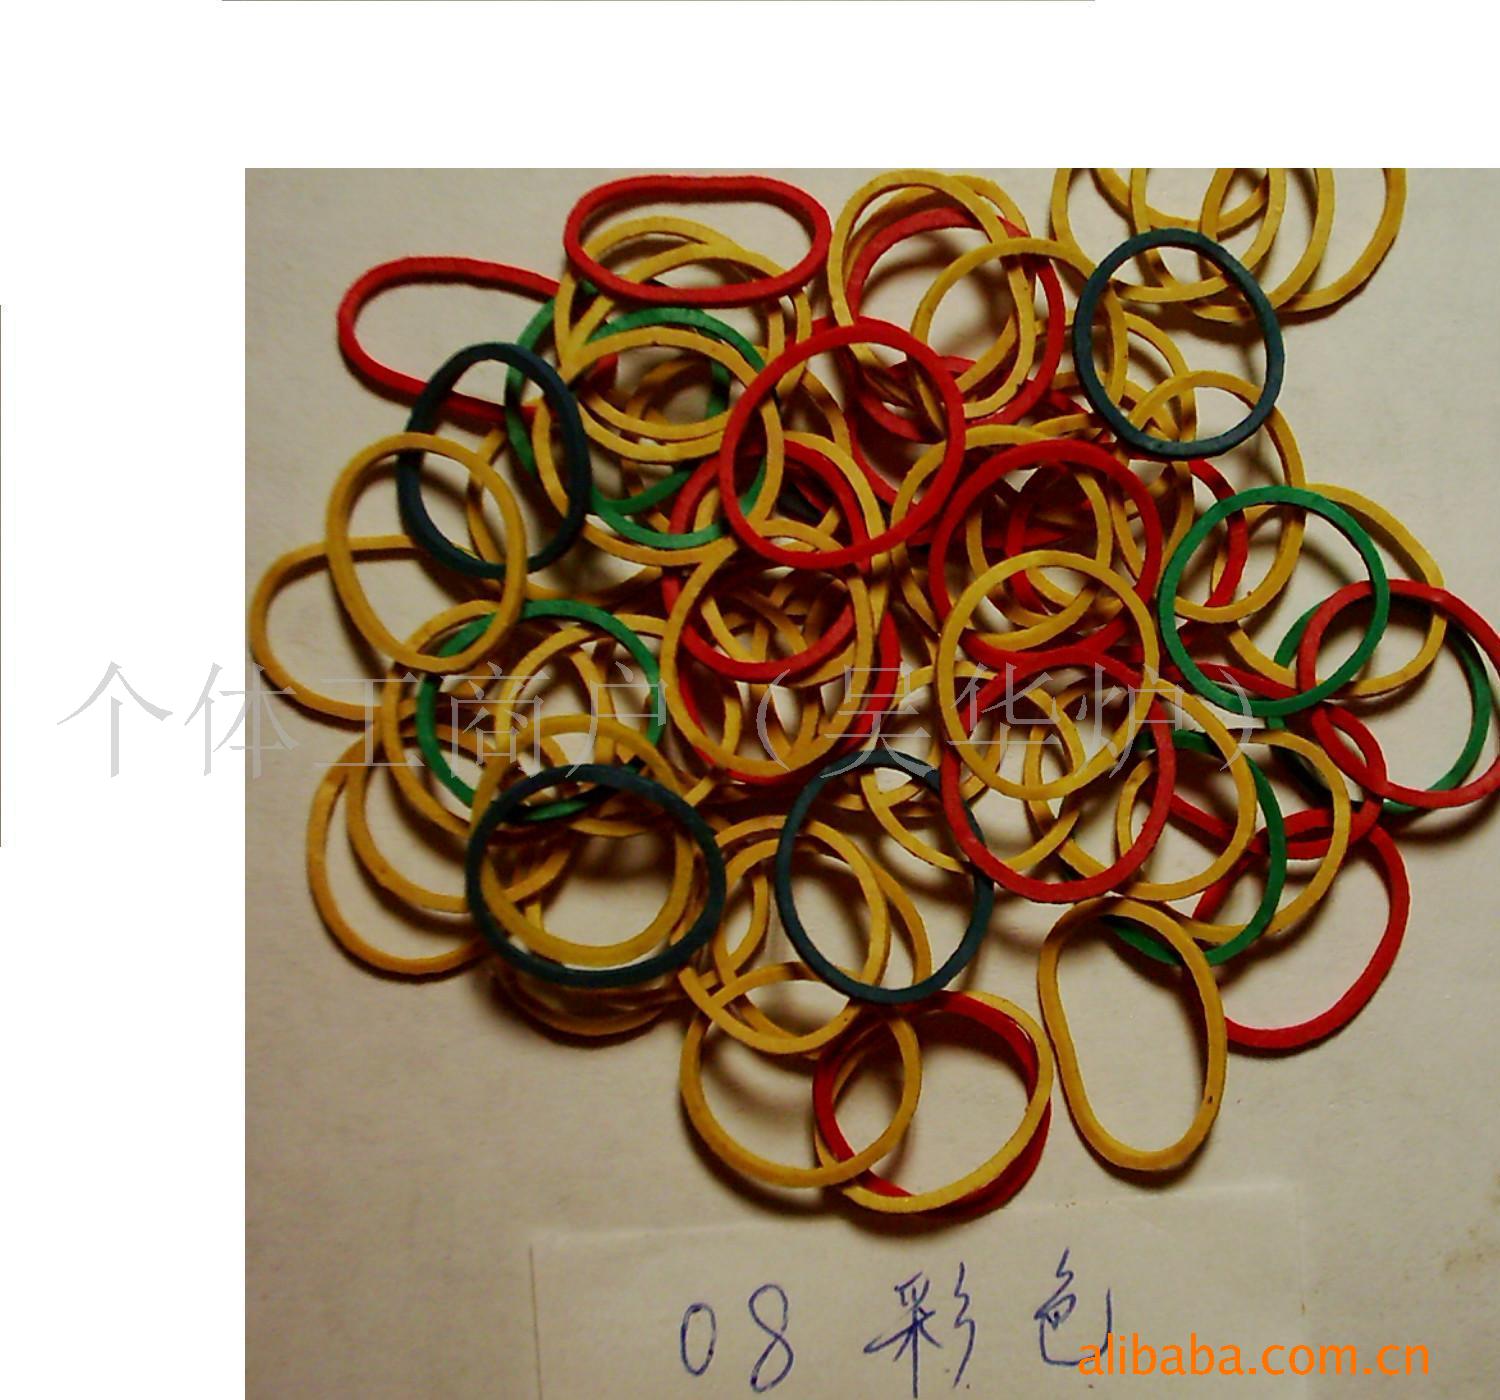 Manufacturers supply 06 , 08 Colored rubber bands